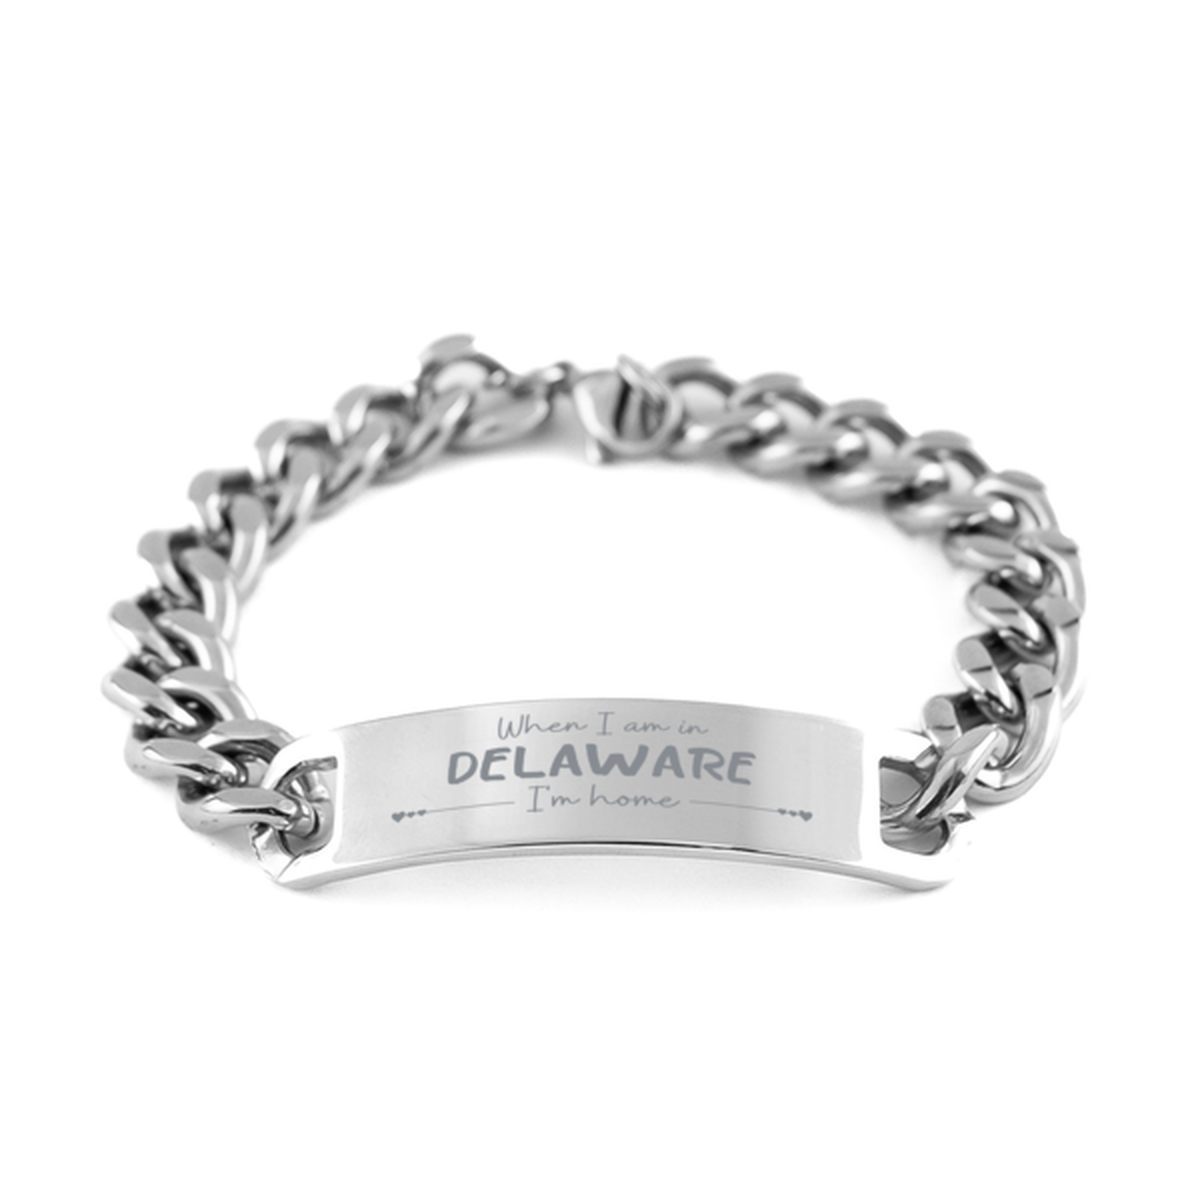 When I am in Delaware I'm home Cuban Chain Stainless Steel Bracelet, Cheap Gifts For Delaware, State Delaware Birthday Gifts for Friends Coworker